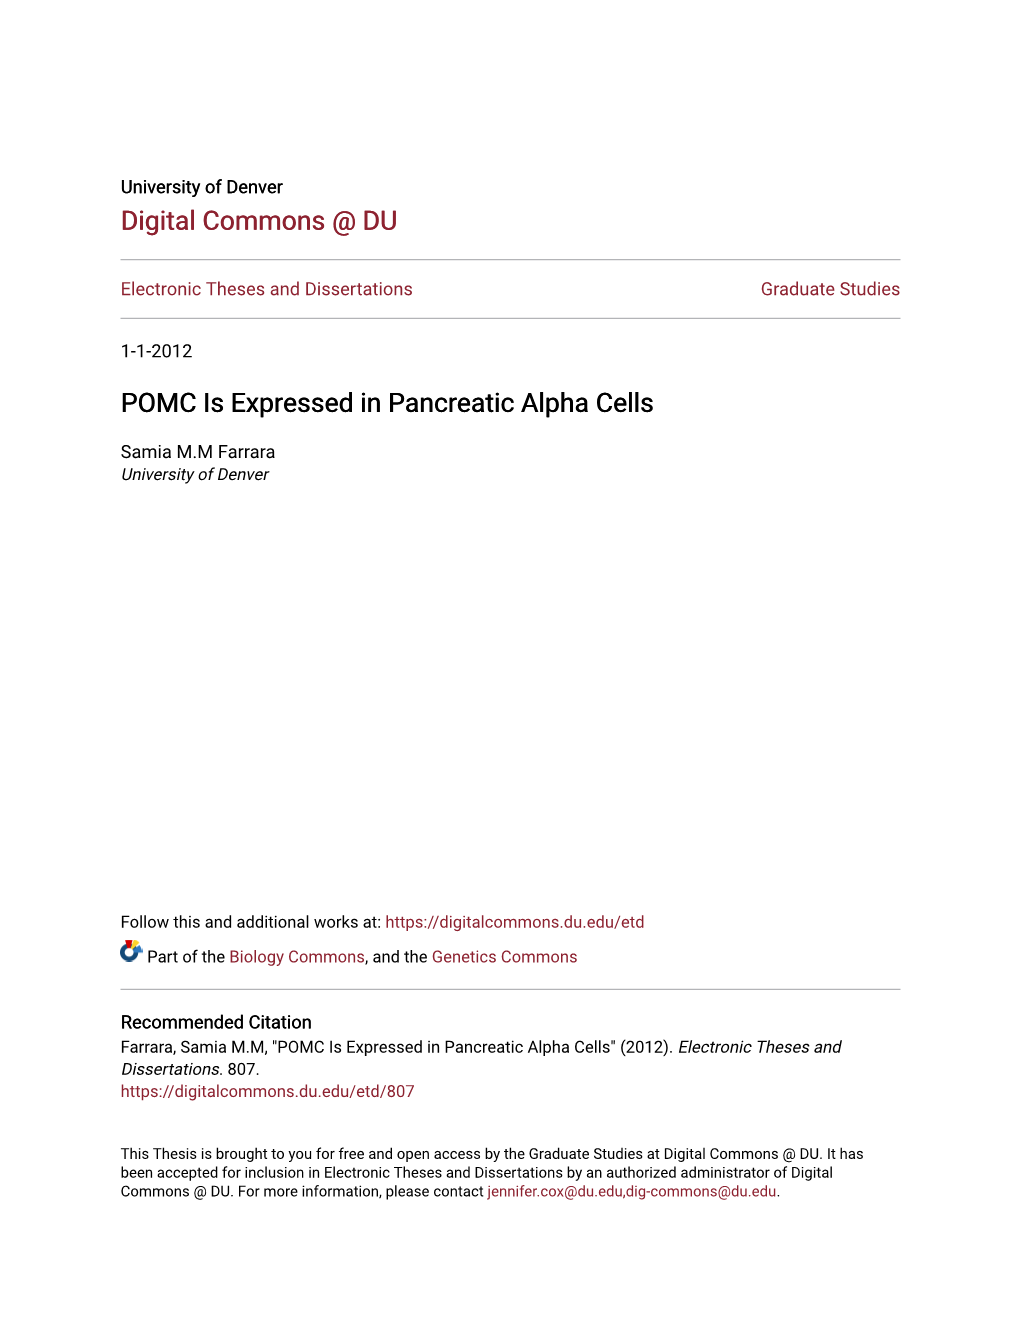 POMC Is Expressed in Pancreatic Alpha Cells